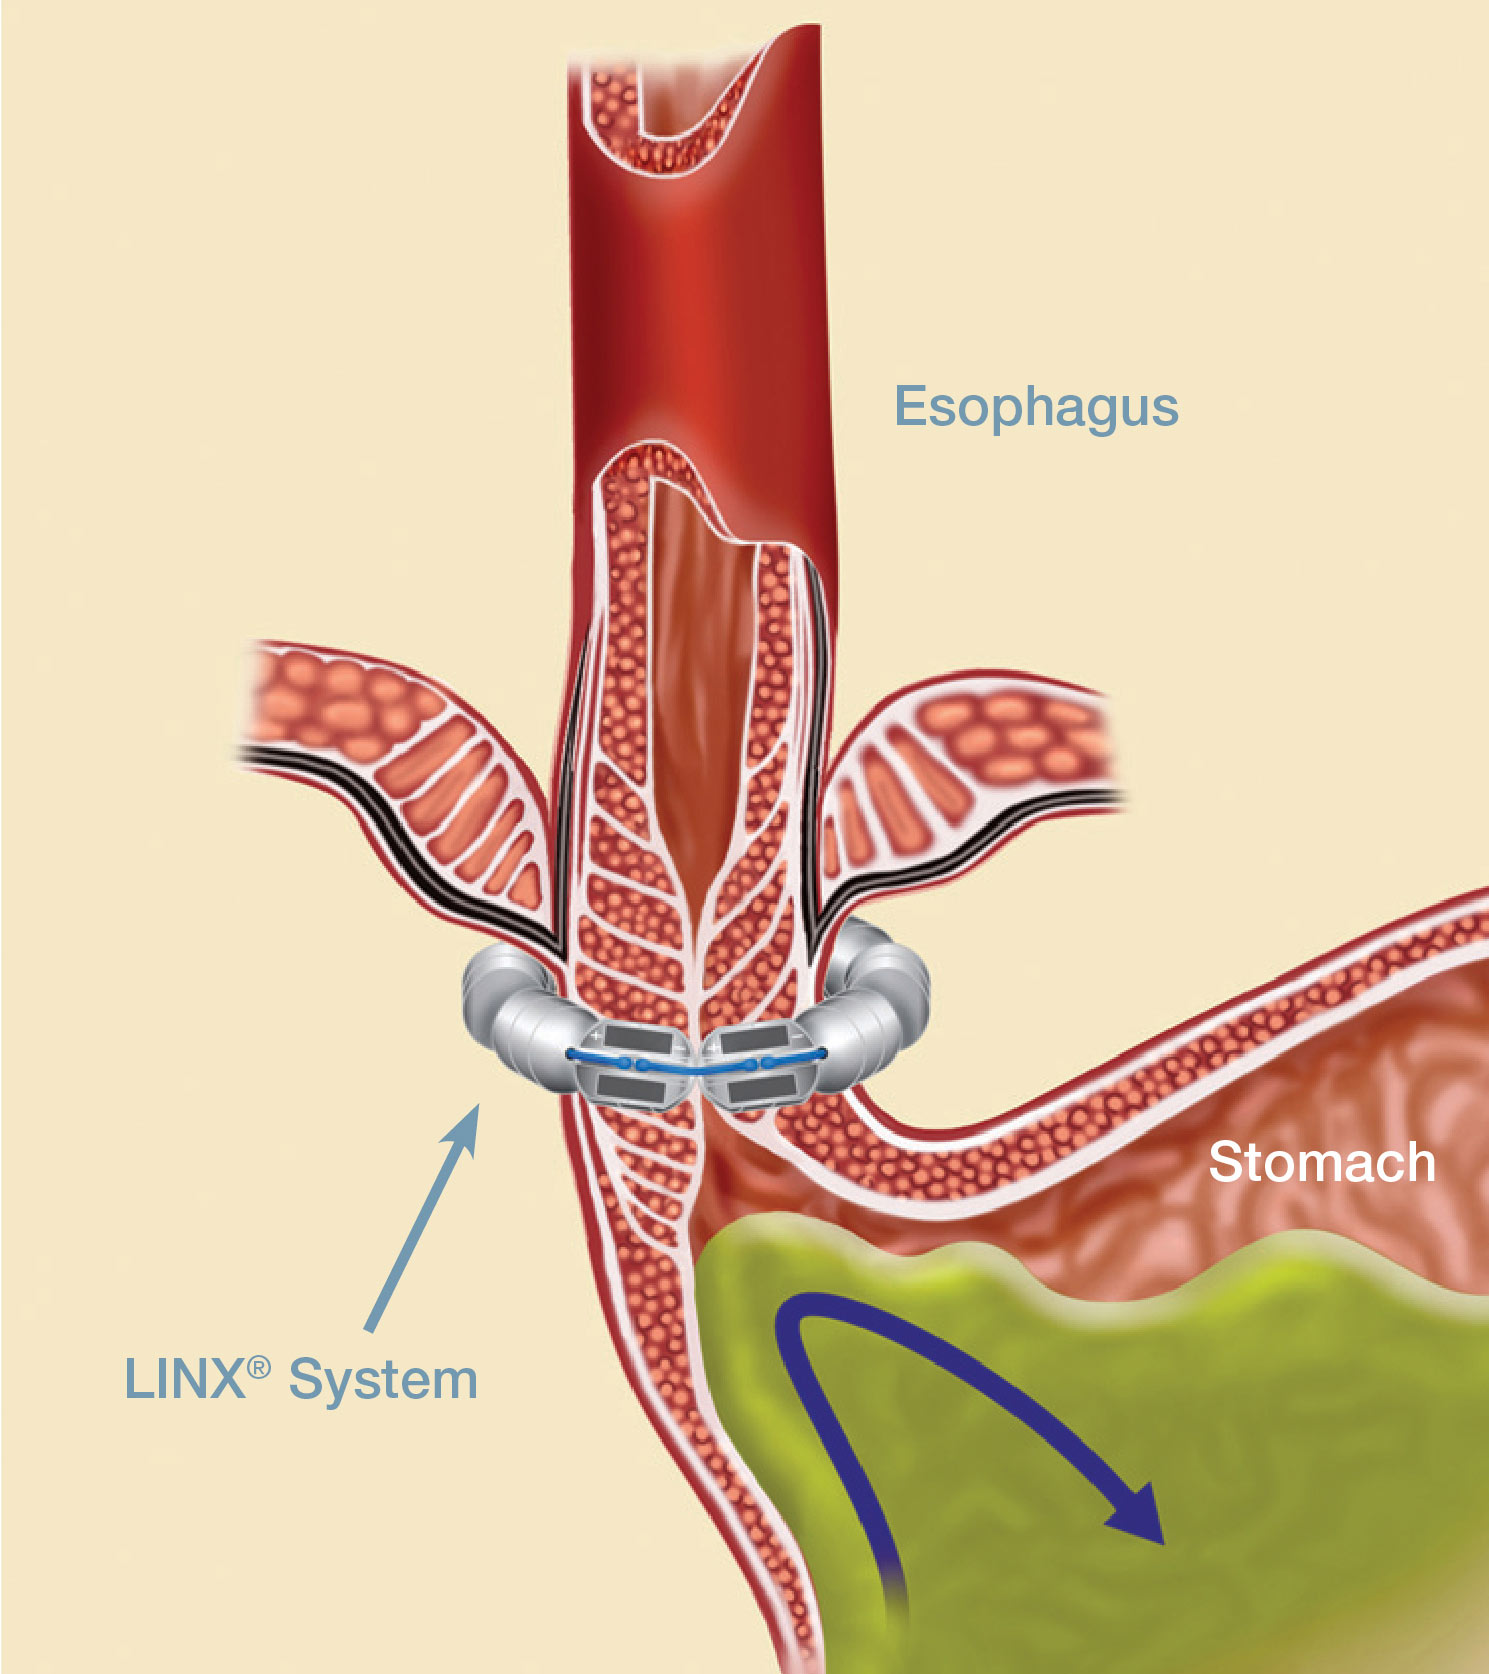 The LINX device, approved by the FDA in early 2012, is currently the only medical device approved by the FDA to be safe and effective for the treatment of gastro-esophageal reflux disease (GERD).